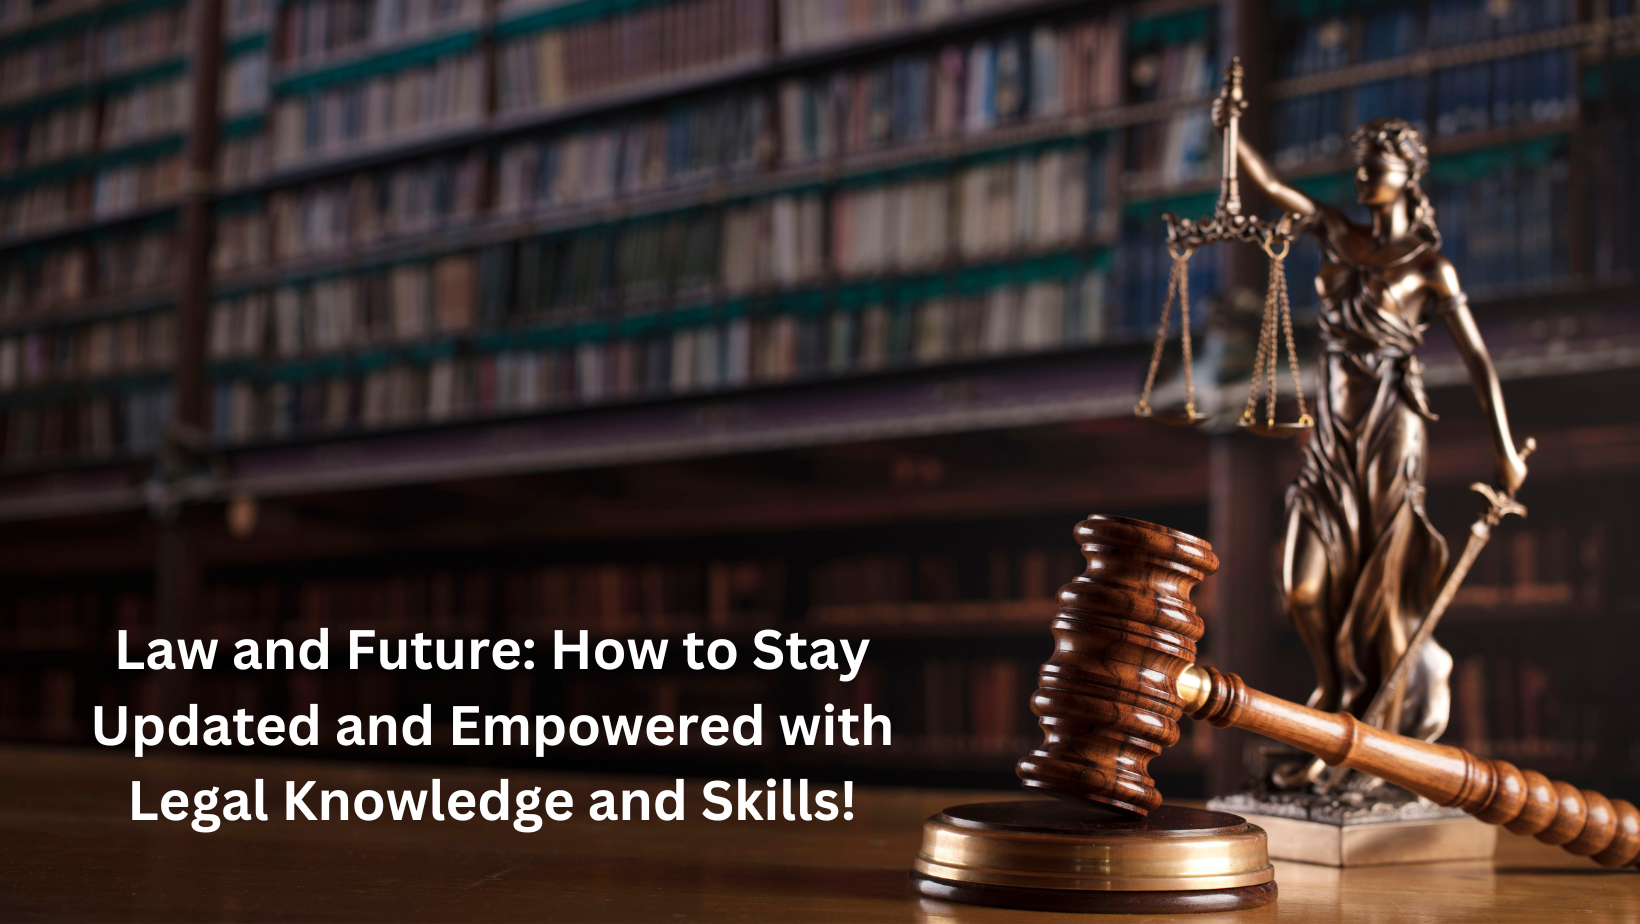 Law and Future: How to Stay Updated and Empowered with Legal Knowledge and Skills!